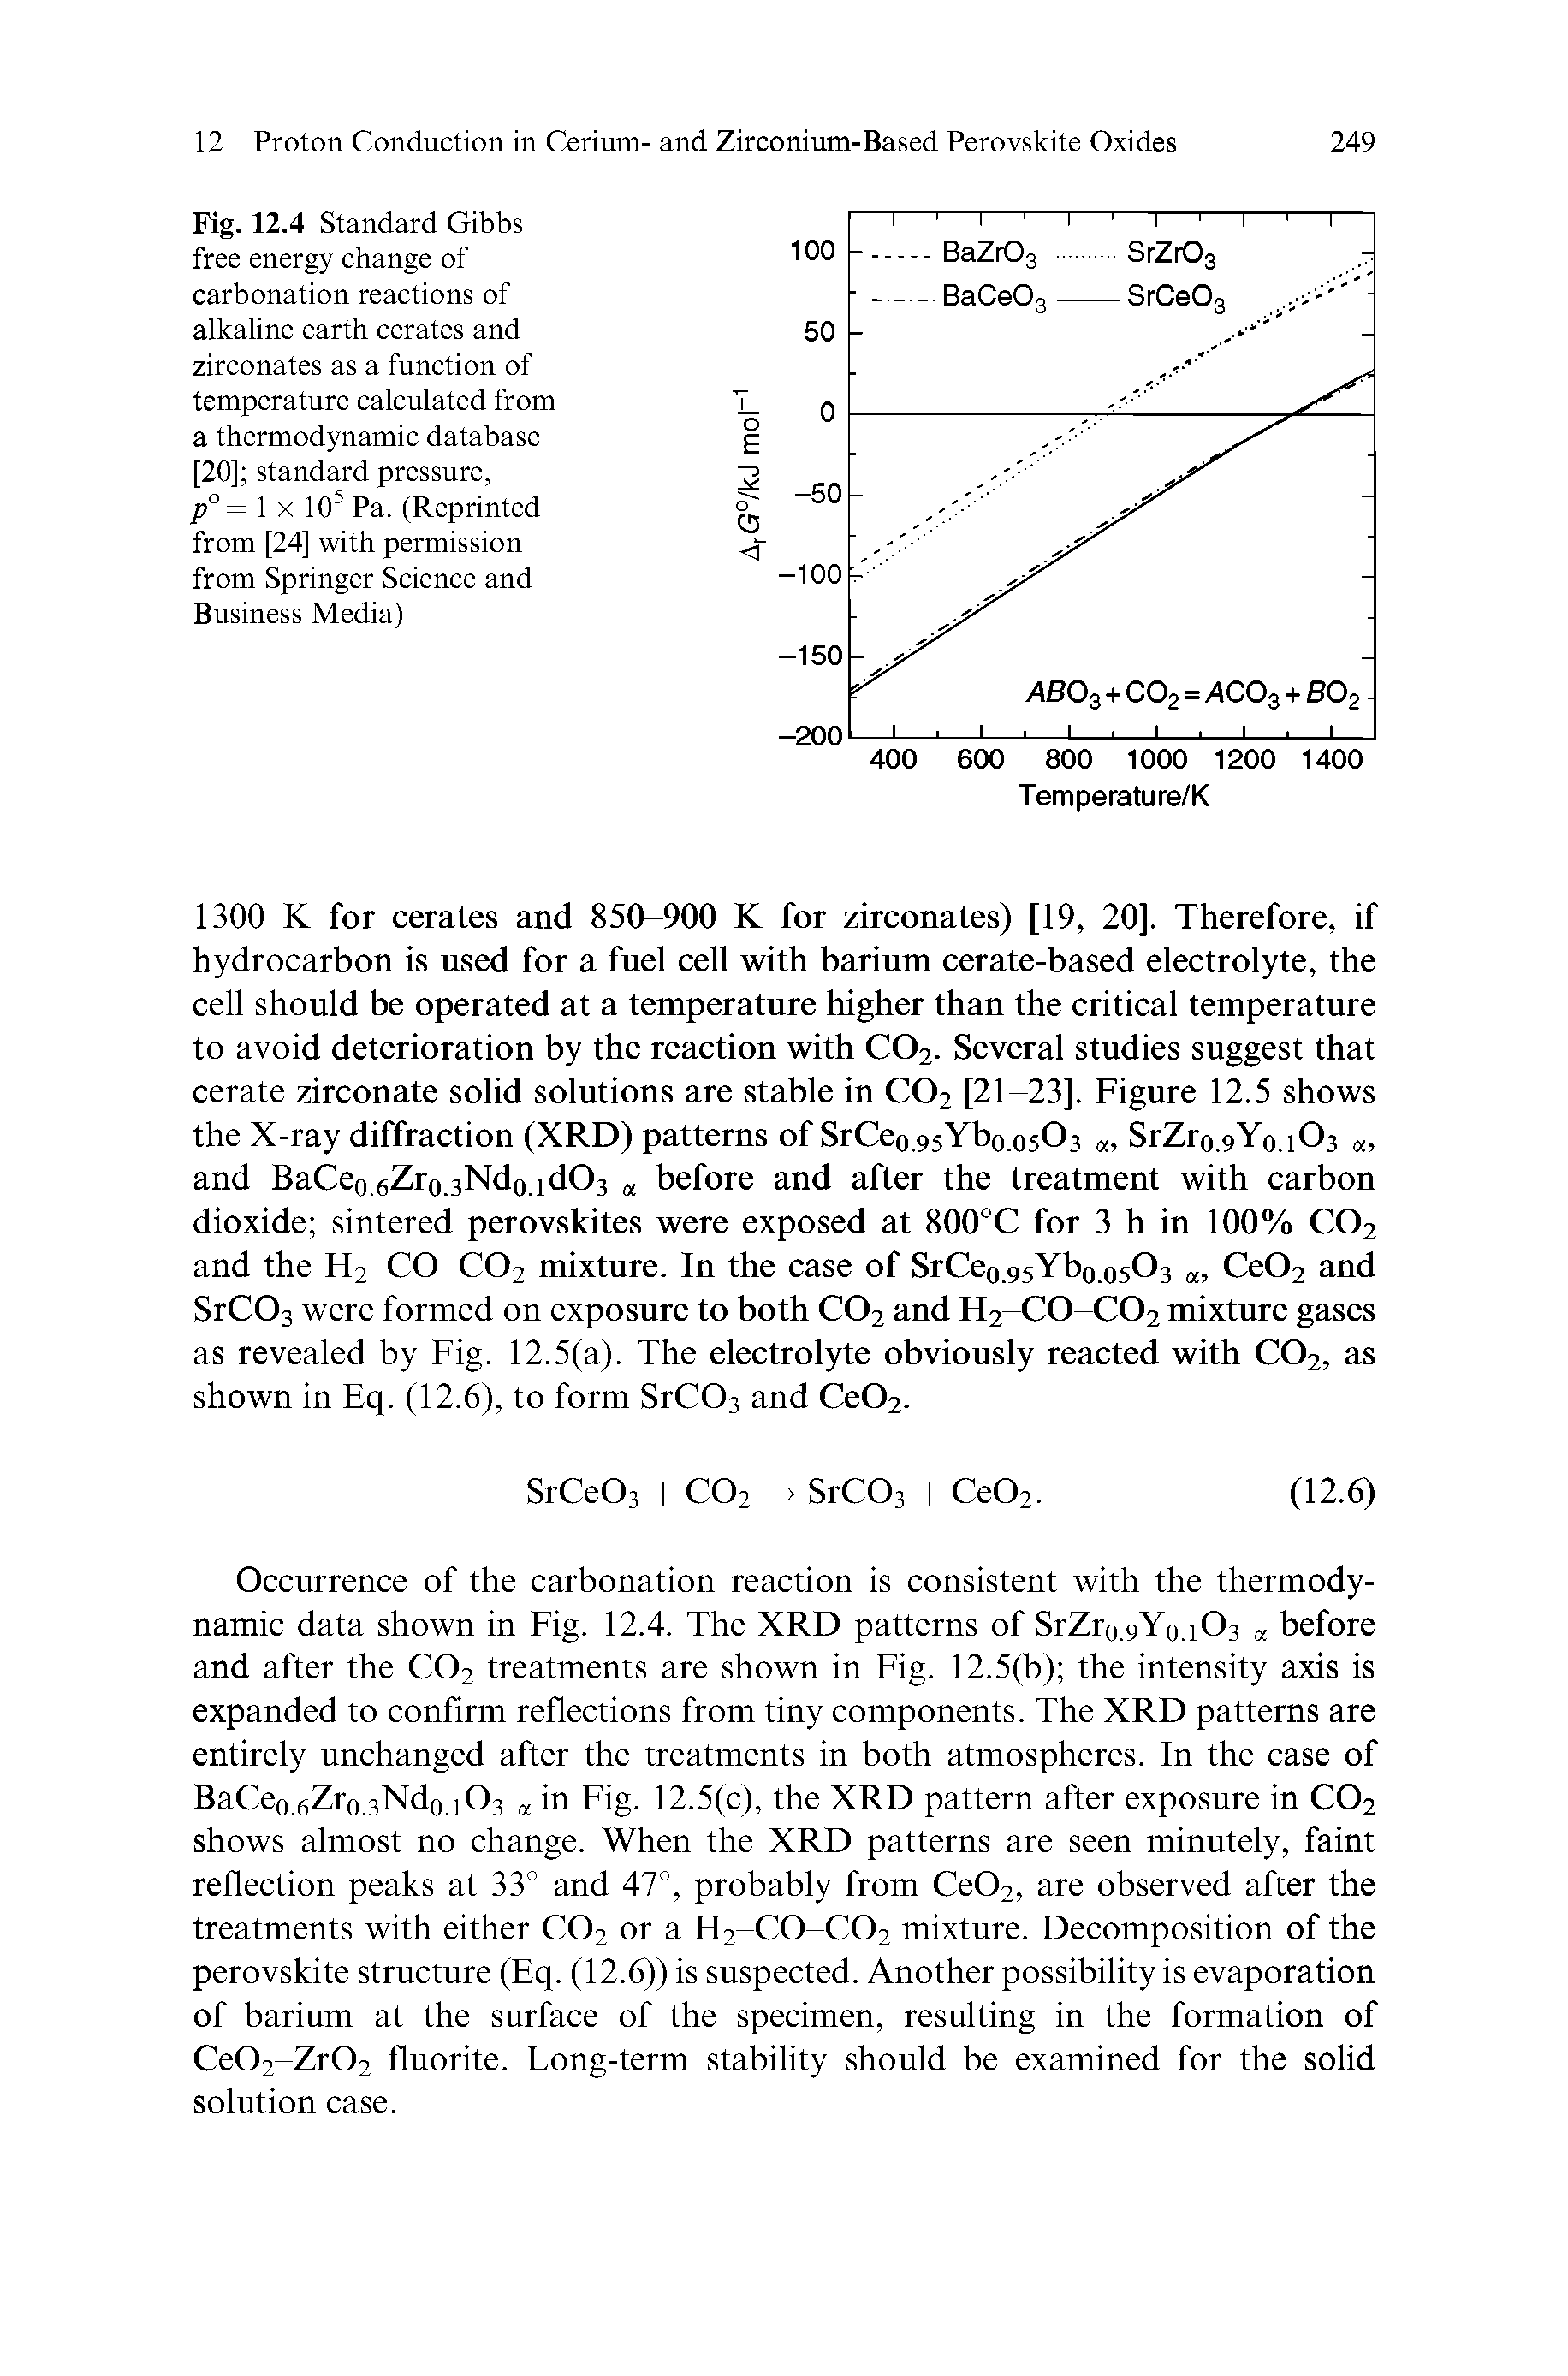 Fig. 12.4 Standard Gibbs free energy change of carbonation reactions of alkaline earth cerates and zirconates as a function of temperature calculated from a thermodynamic database [20] standard pressure, p°=l X 10 Pa. (Reprinted from [24] with permission from Springer Science and Business Media)...